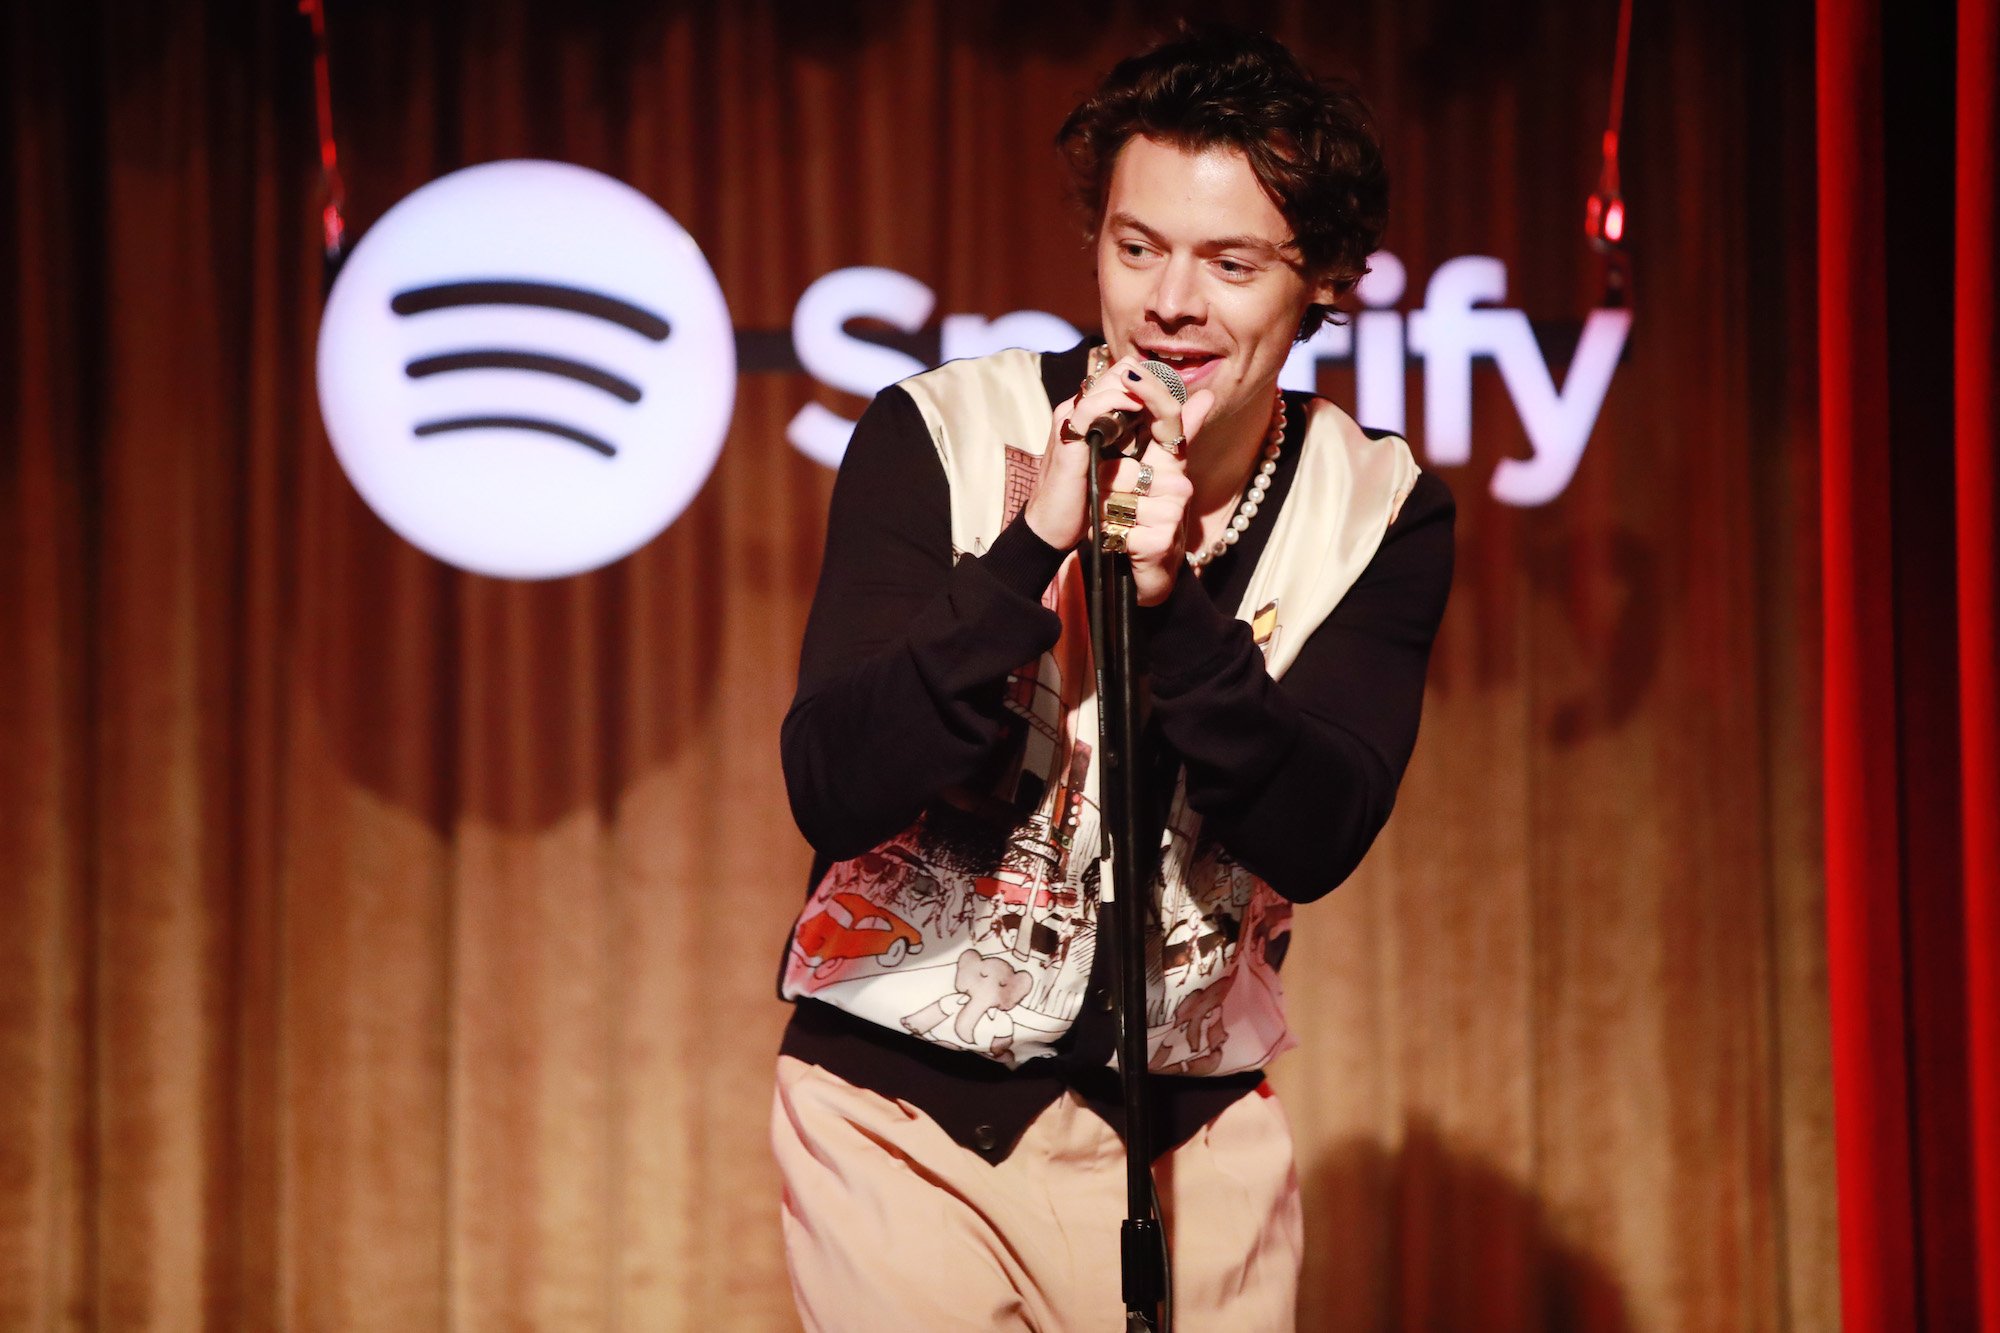 Harry Styles onstage during the Spotify launch of Harry Styles' 'Fine Line' album on December 11, 2019.